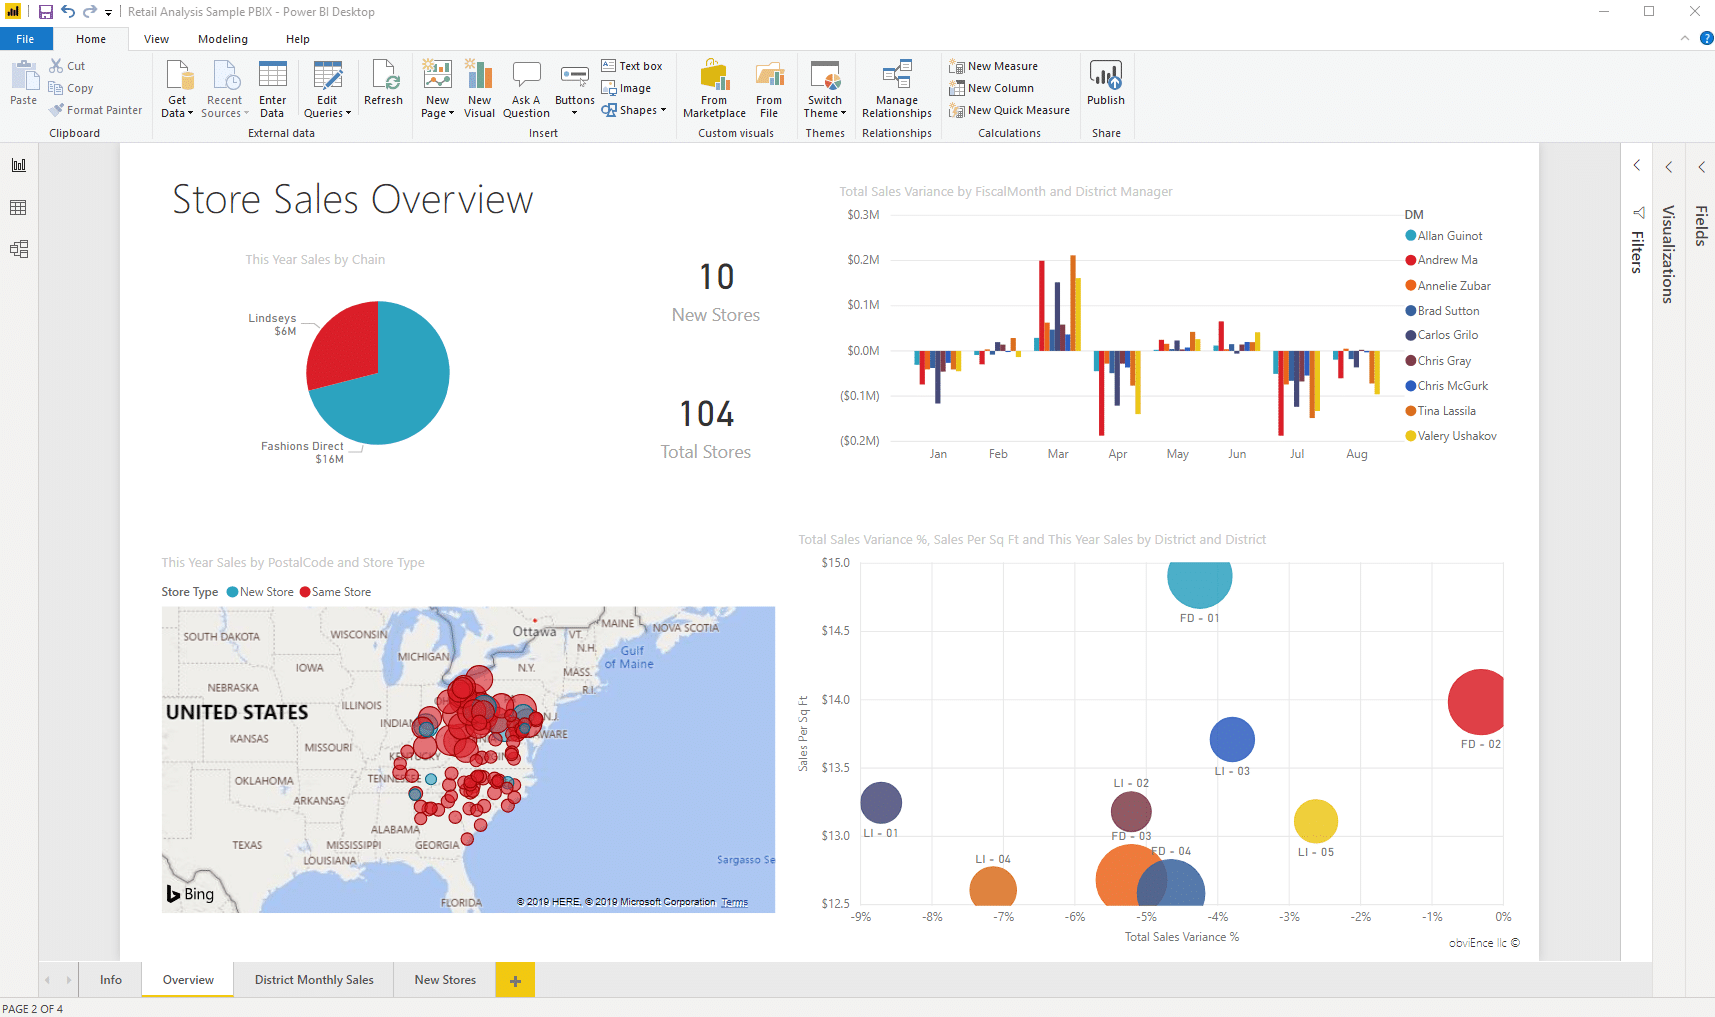 How to Use the Included Sample Data in Power BI (+Examples)